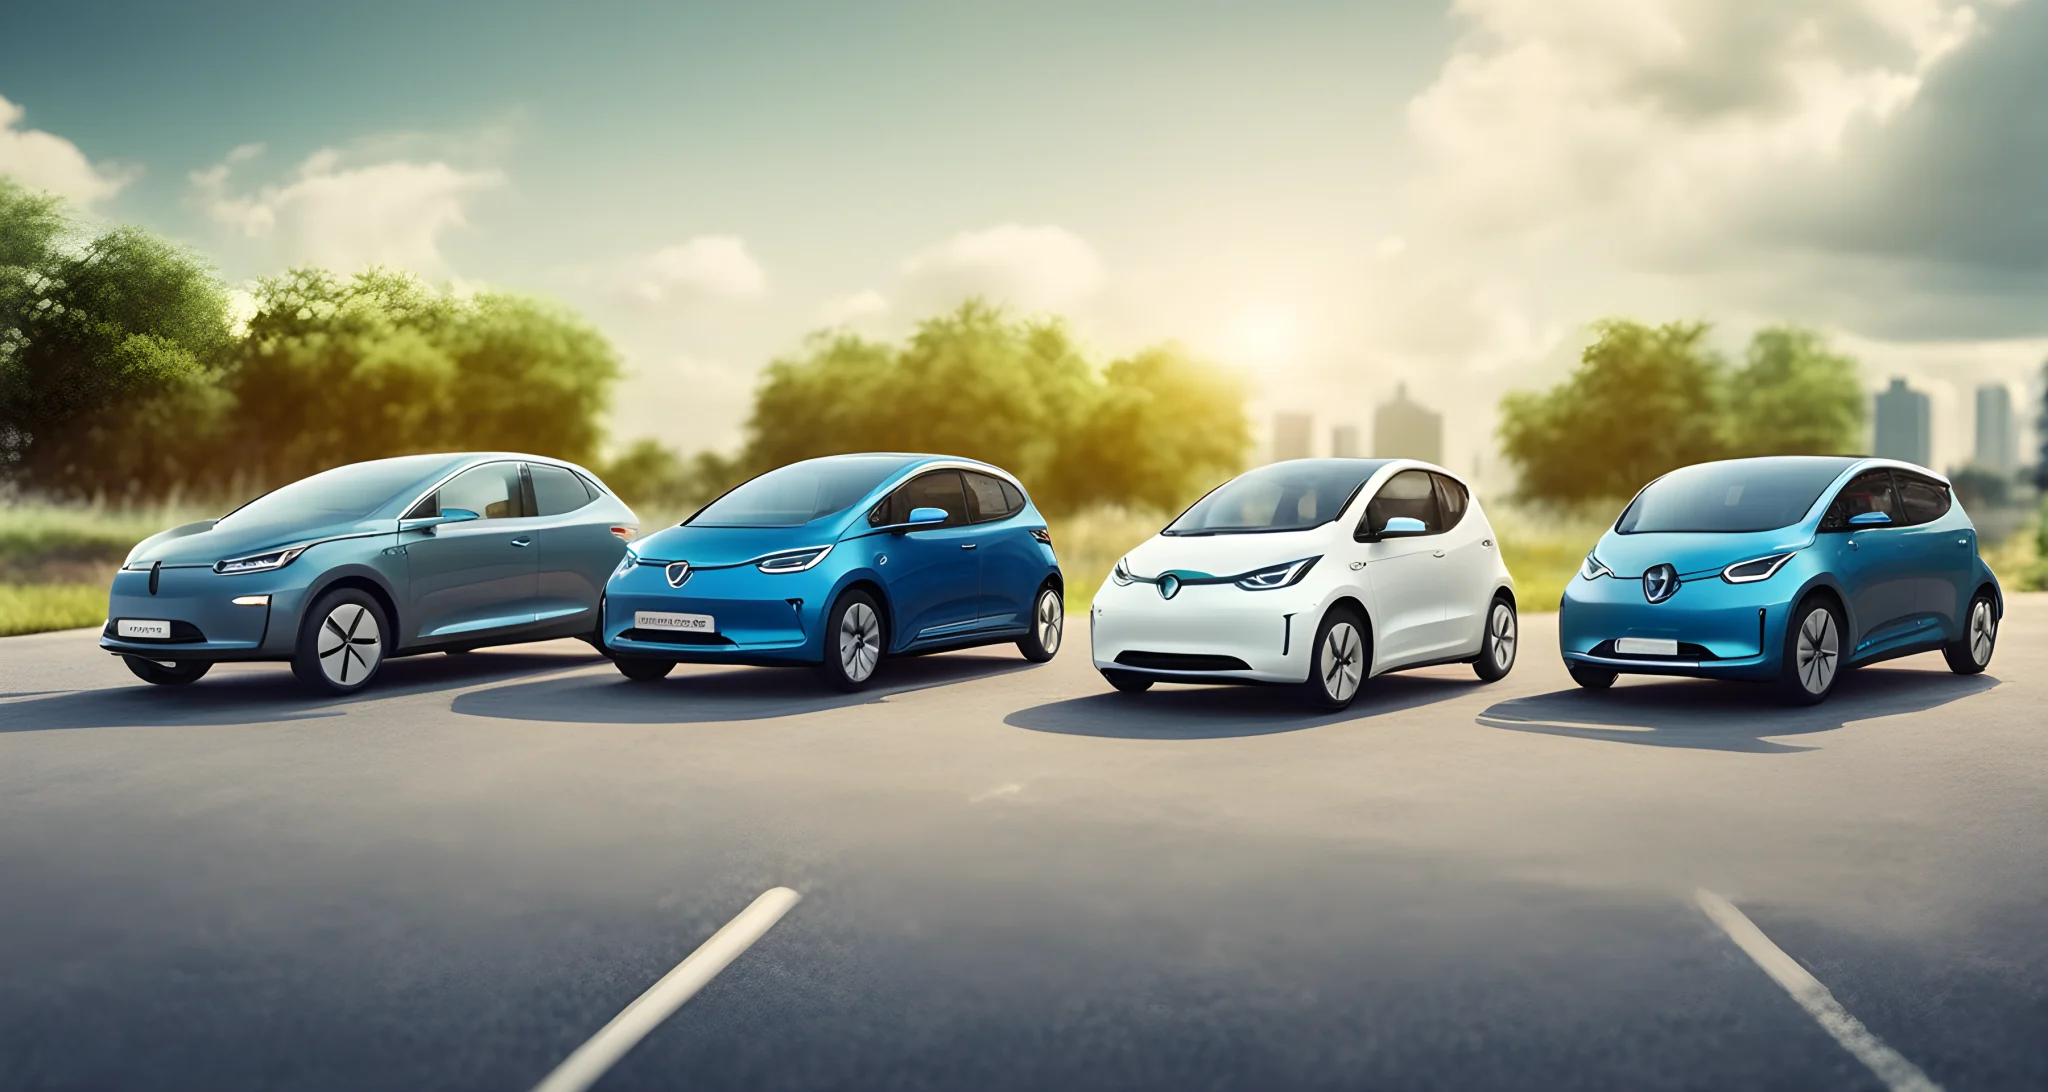 The image features a row of various electric vehicle models from different manufacturers.